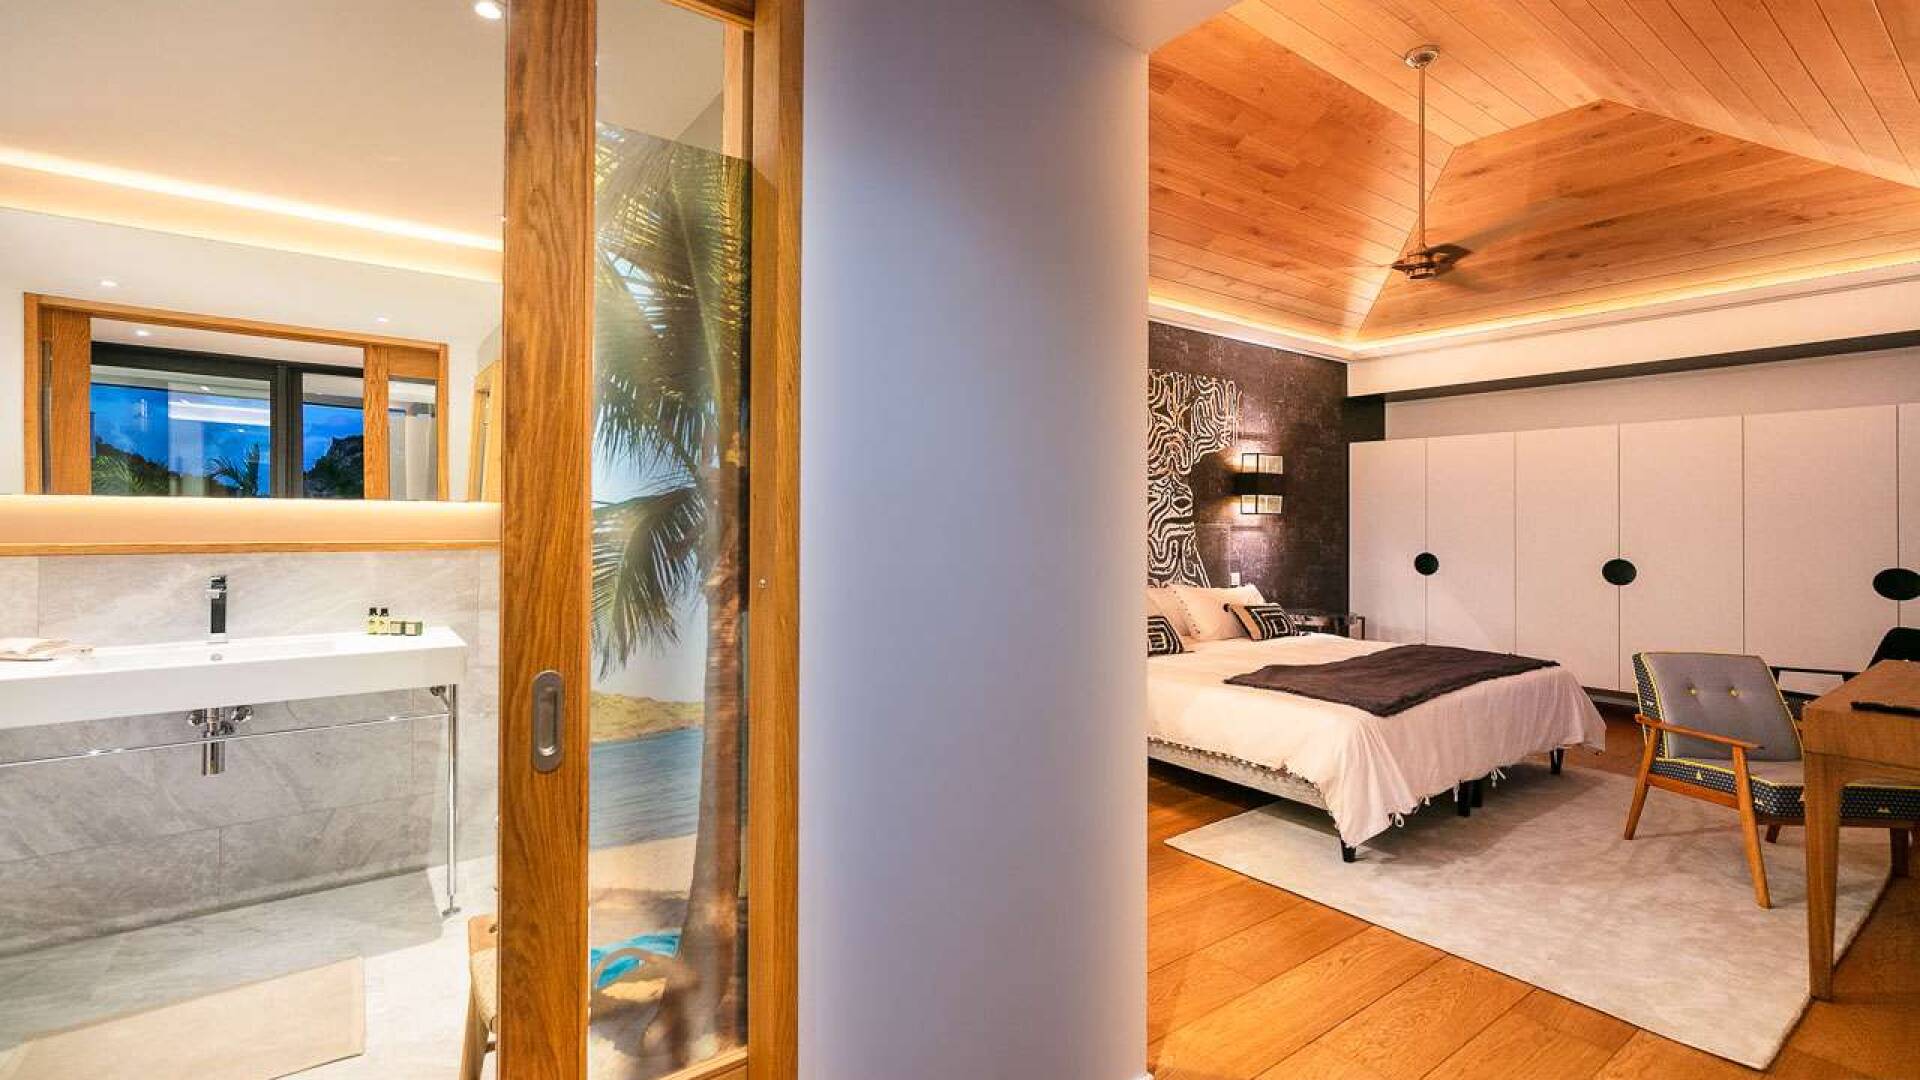 Bedroom at WV GUL, Gustavia, St. Barthelemy